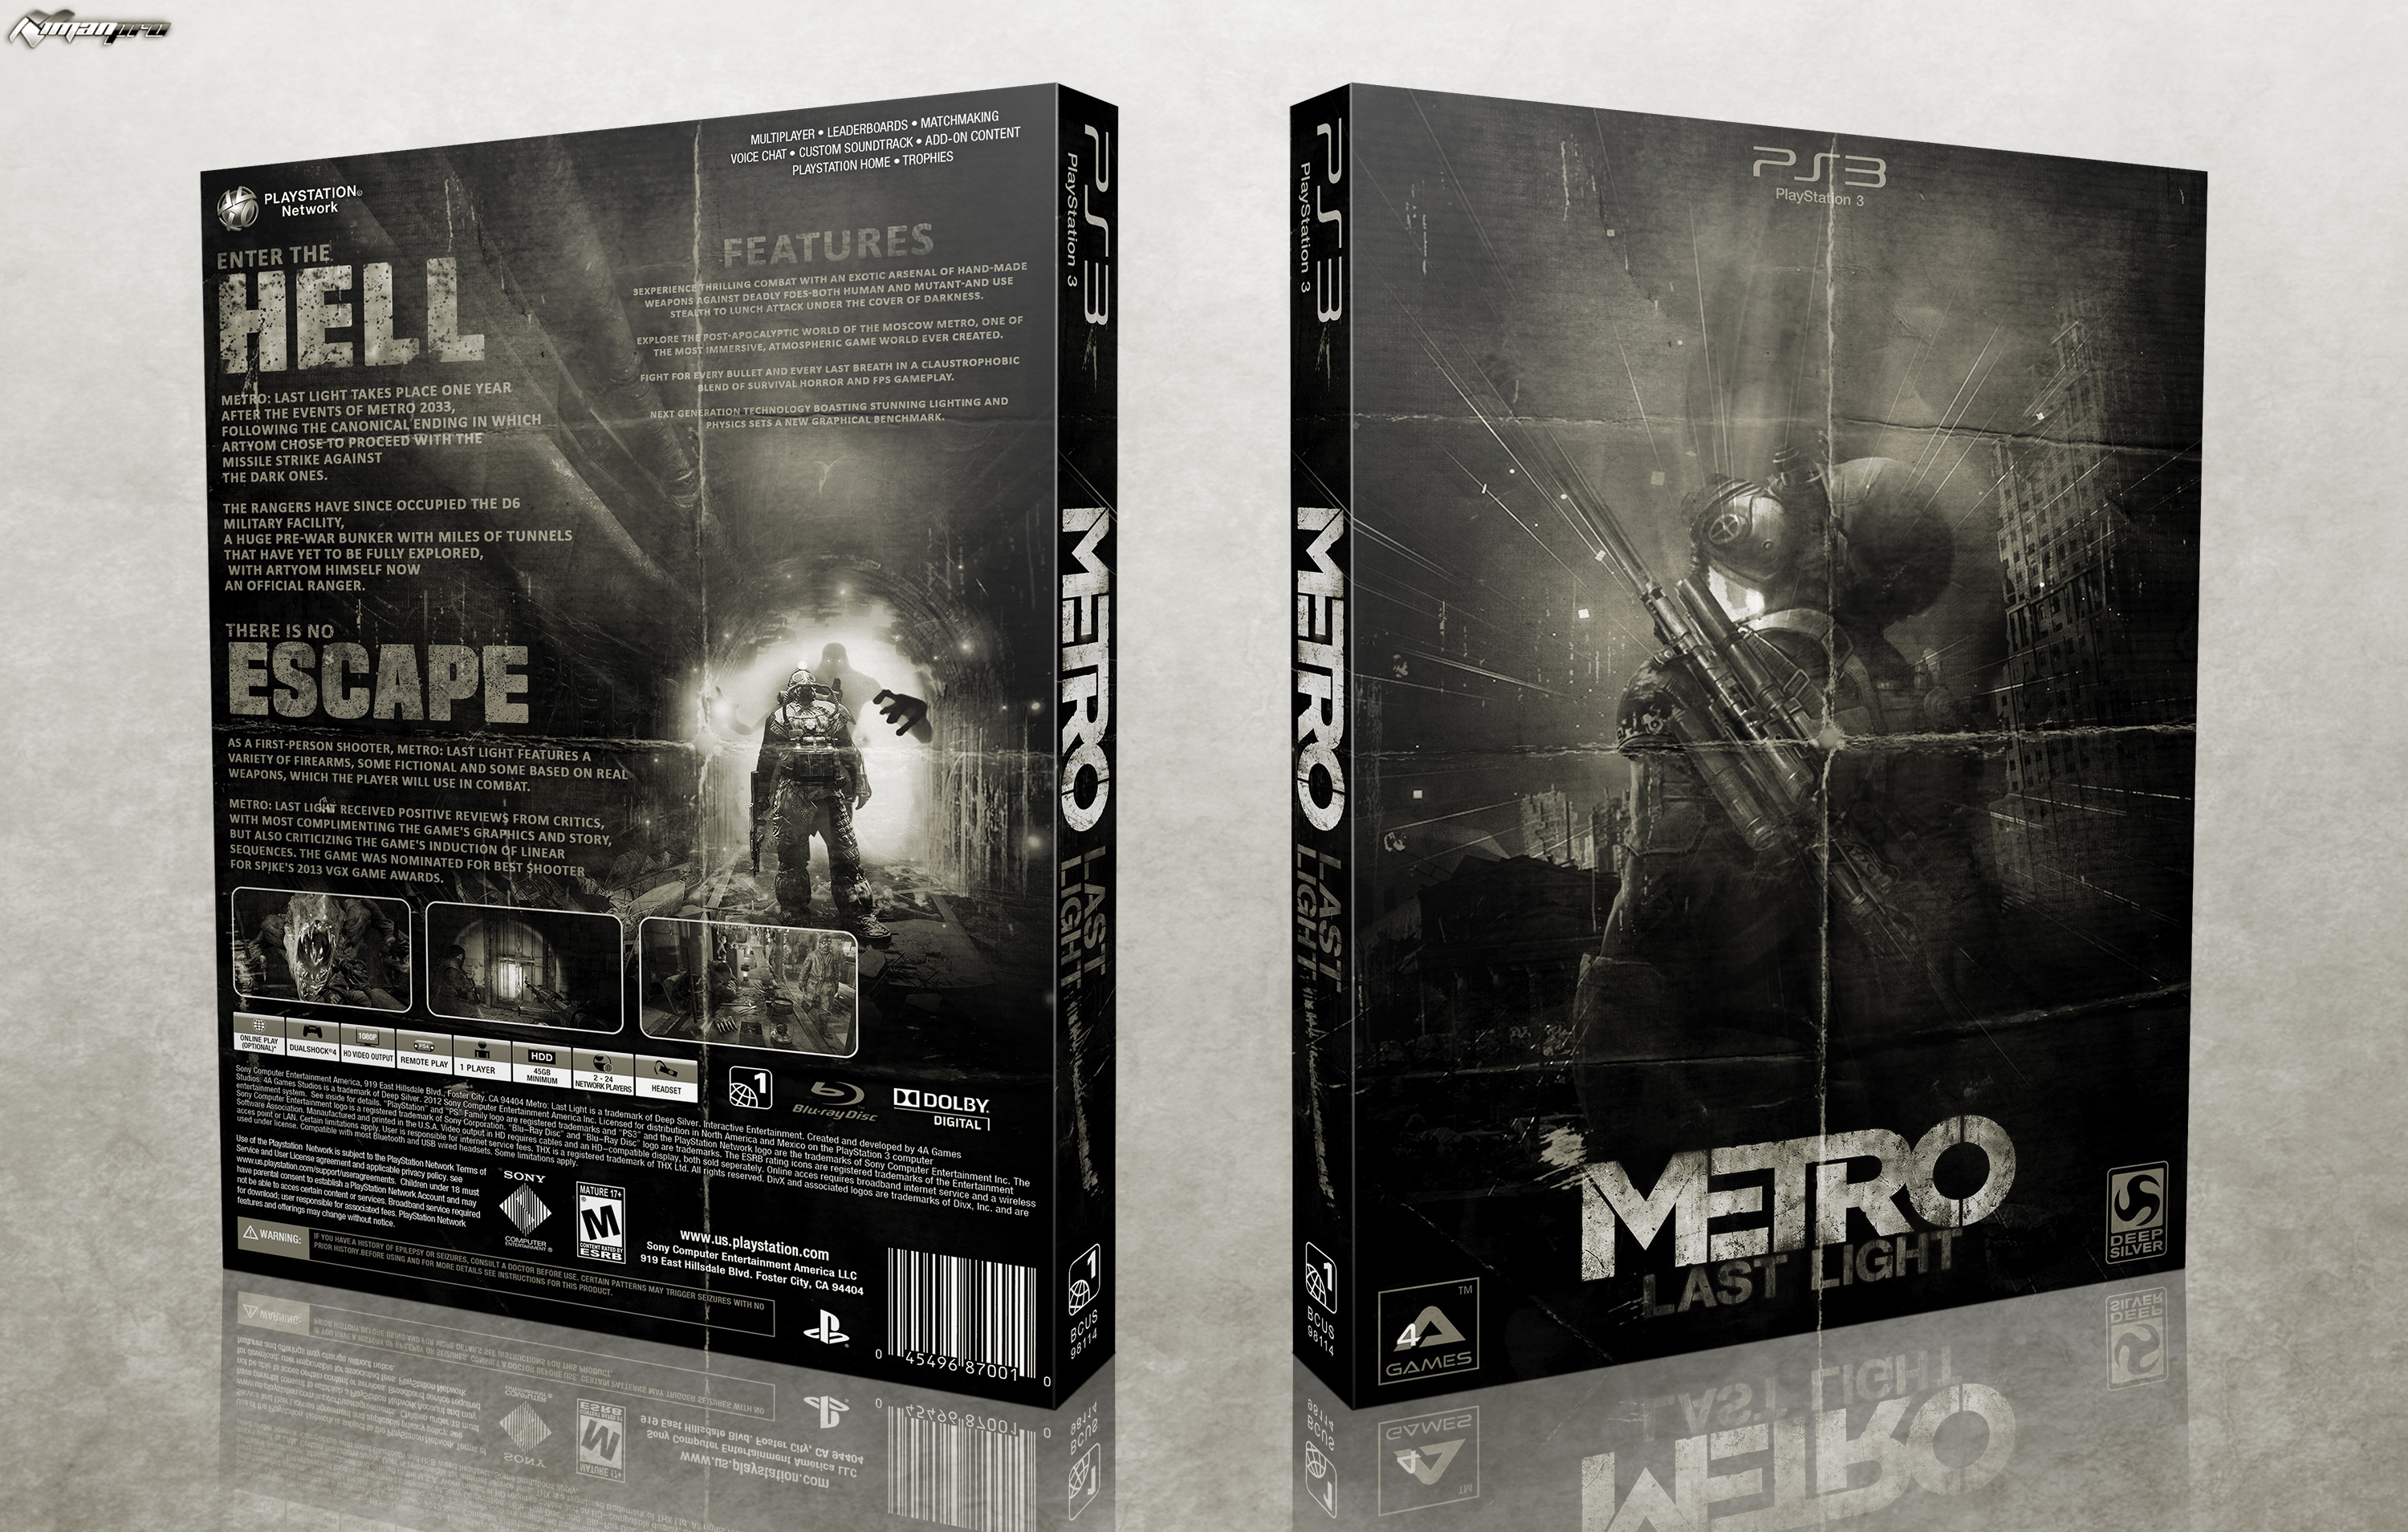 Viewing full size Metro Last Light box cover